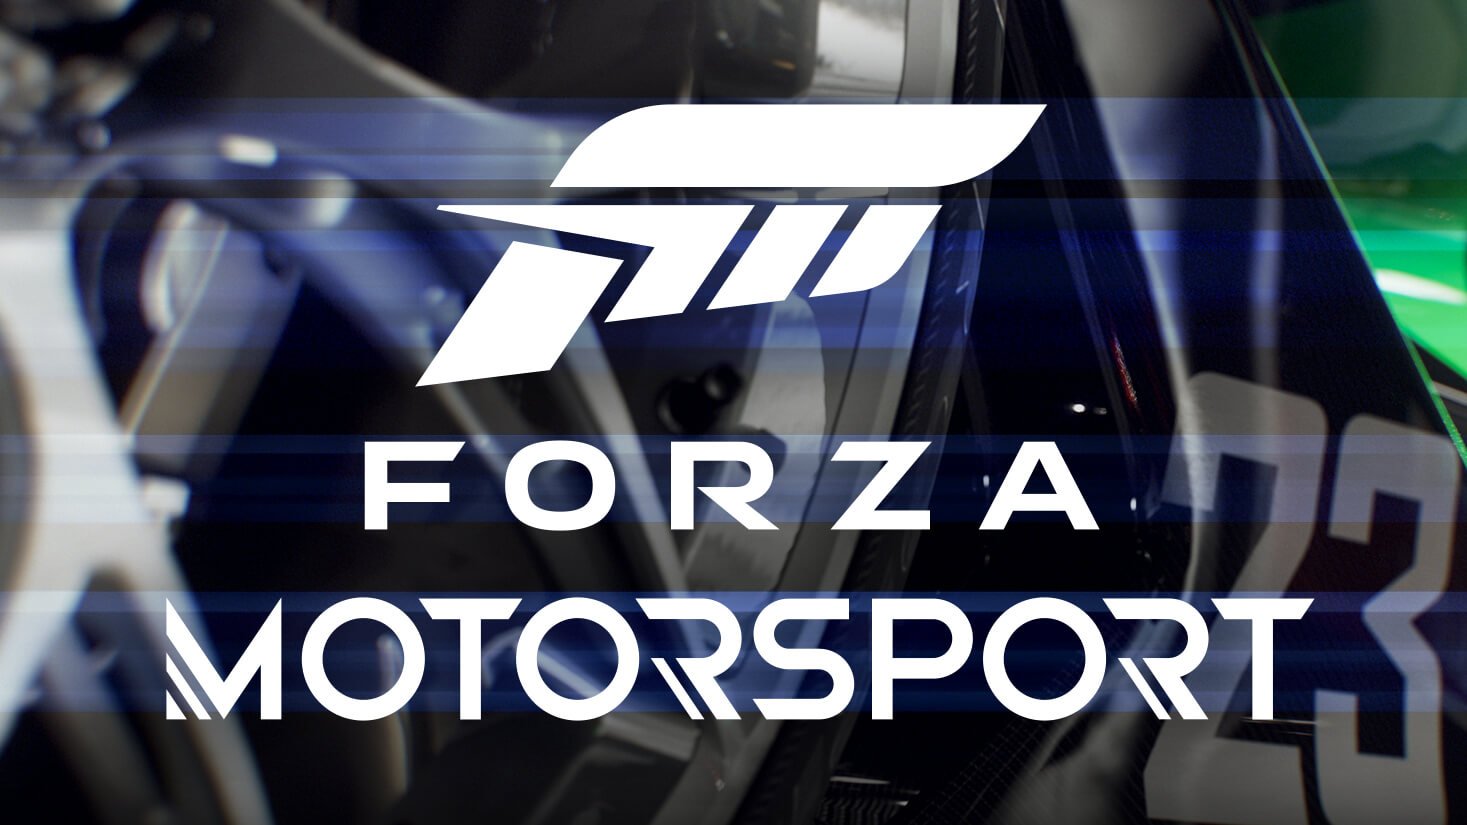 Gran Turismo 7 Finally Coming to PC? - Xbox & Games Industry - Official  Forza Community Forums